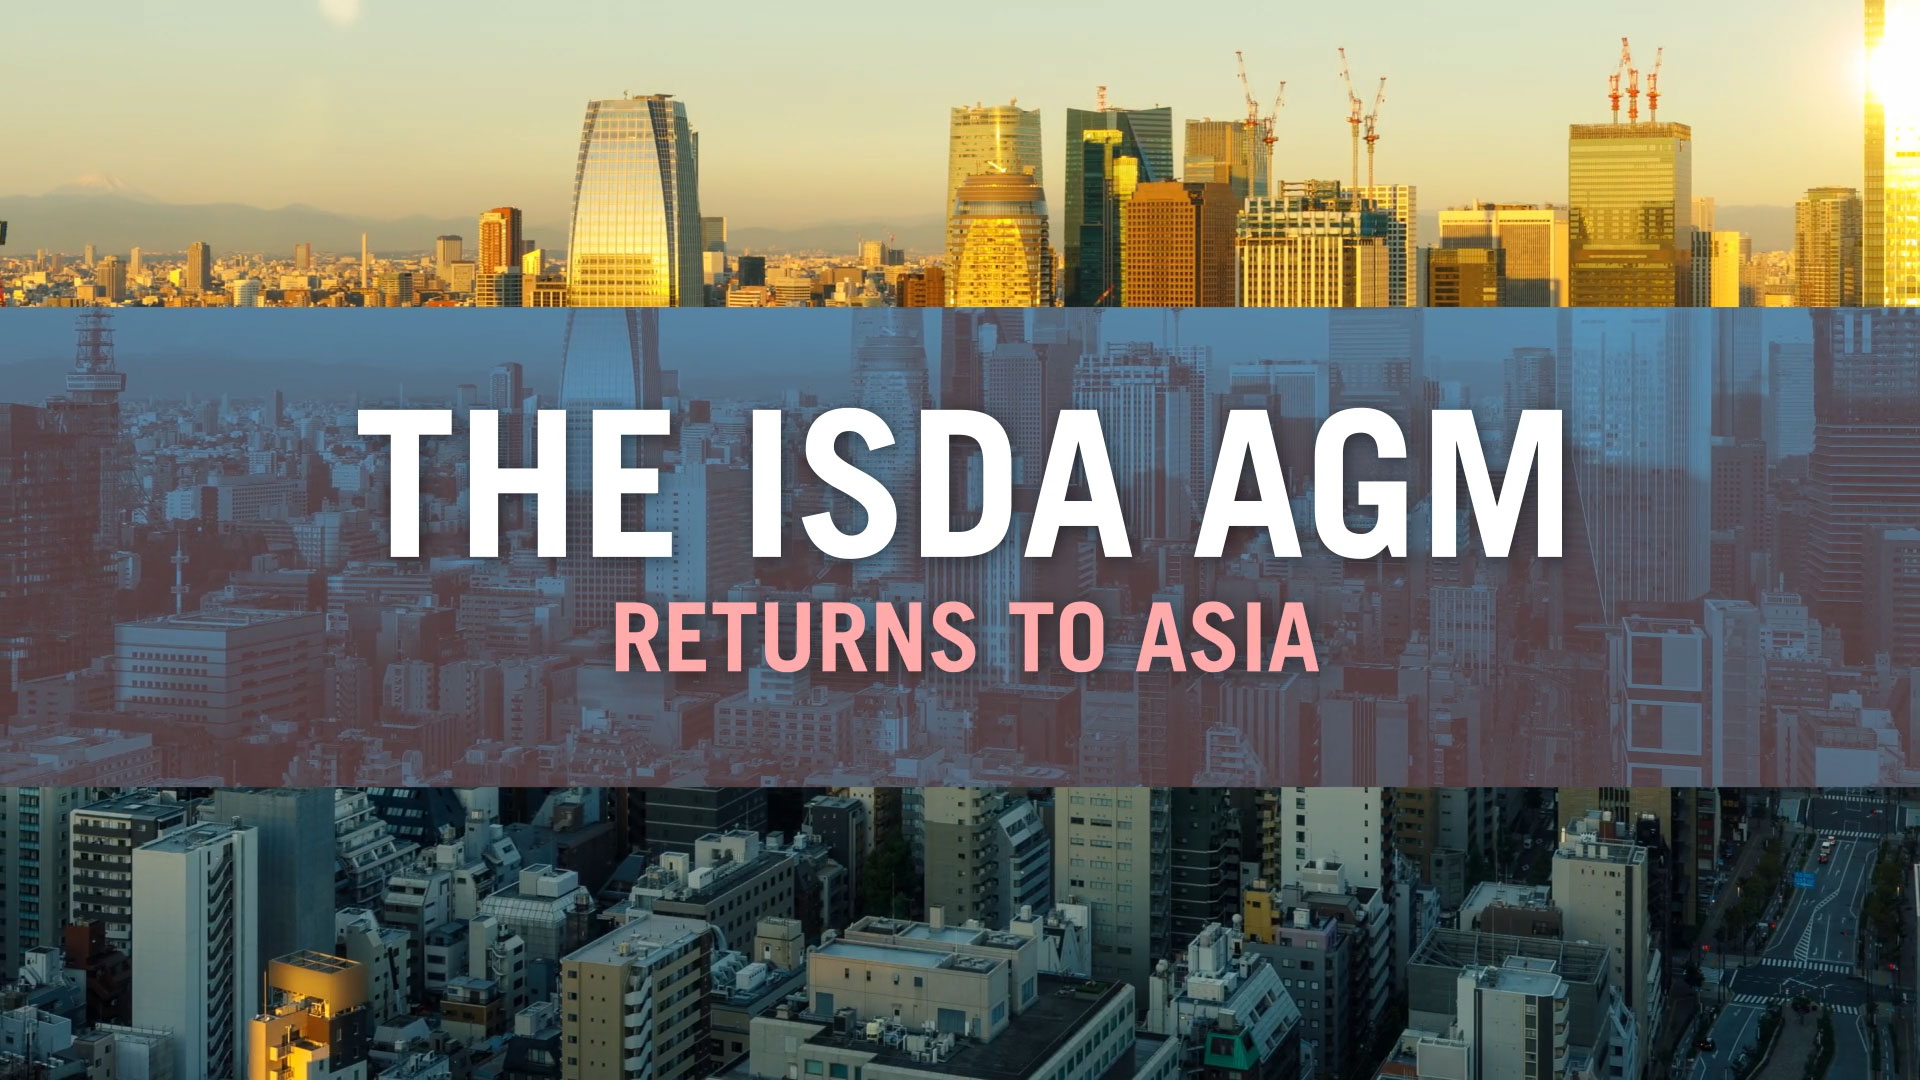 ISDA returns to Asia for its 38th Annual General Meeting in Tokyo on April 16-18, 2024. Don’t miss out – register today at http://agm.isda.org